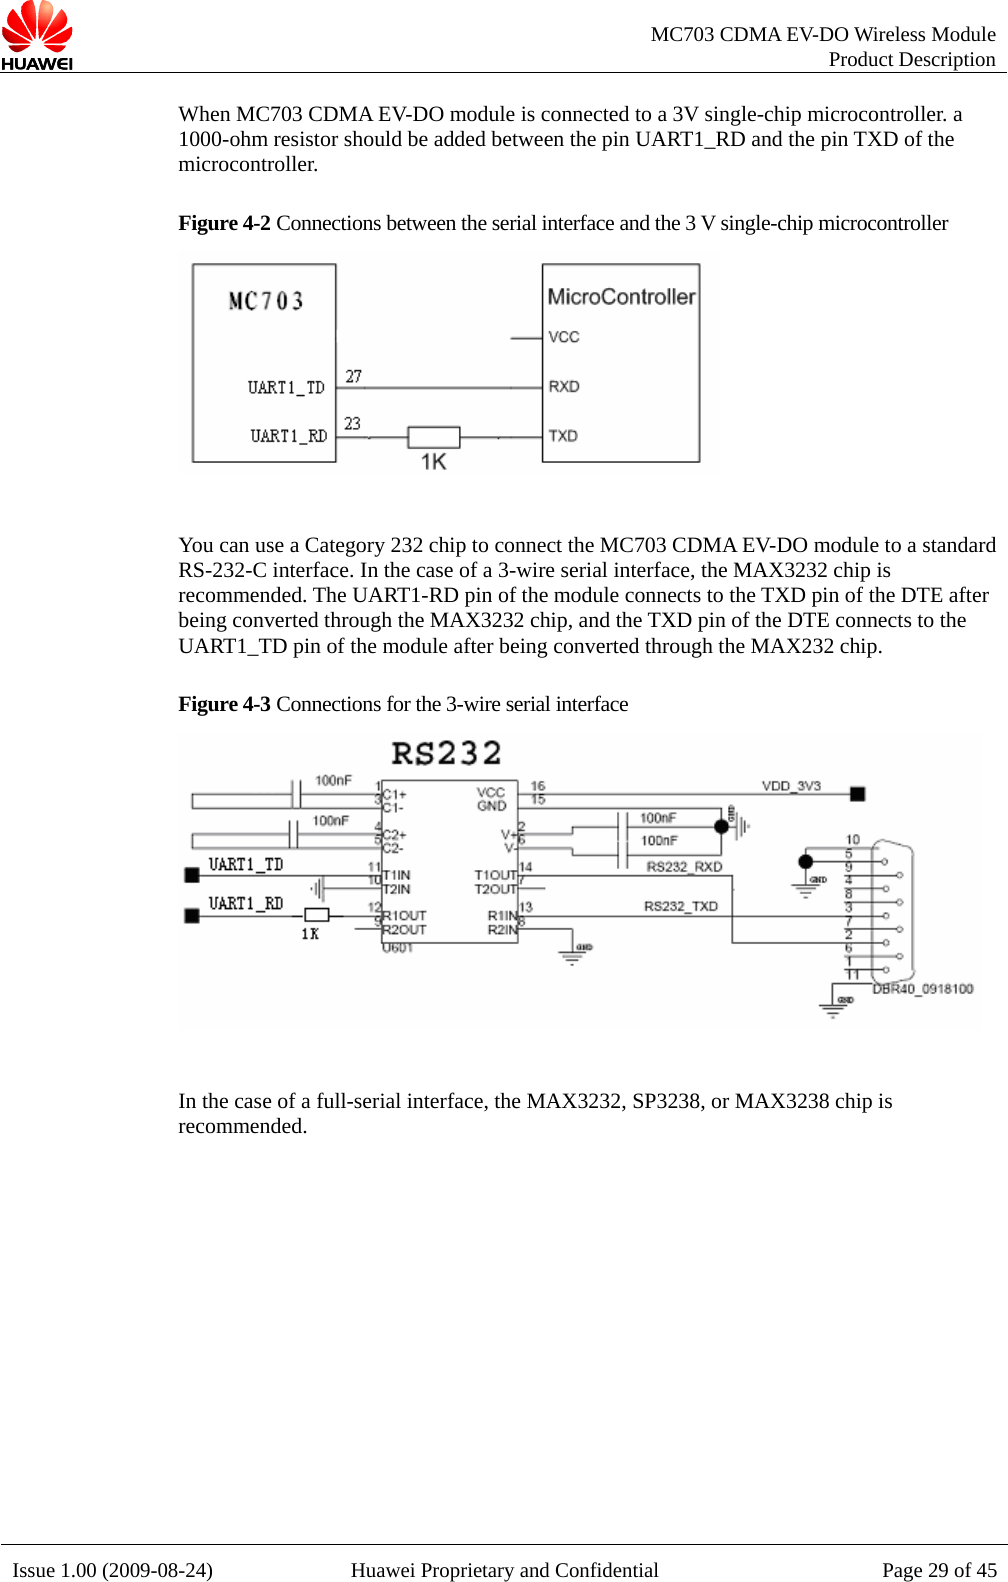   MC703 CDMA EV-DO Wireless Module Product Description Issue 1.00 (2009-08-24)  Huawei Proprietary and Confidential Page 29 of 45When MC703 CDMA EV-DO module is connected to a 3V single-chip microcontroller. a 1000-ohm resistor should be added between the pin UART1_RD and the pin TXD of the microcontroller. Figure 4-2 Connections between the serial interface and the 3 V single-chip microcontroller   You can use a Category 232 chip to connect the MC703 CDMA EV-DO module to a standard RS-232-C interface. In the case of a 3-wire serial interface, the MAX3232 chip is recommended. The UART1-RD pin of the module connects to the TXD pin of the DTE after being converted through the MAX3232 chip, and the TXD pin of the DTE connects to the UART1_TD pin of the module after being converted through the MAX232 chip. Figure 4-3 Connections for the 3-wire serial interface   In the case of a full-serial interface, the MAX3232, SP3238, or MAX3238 chip is recommended.  